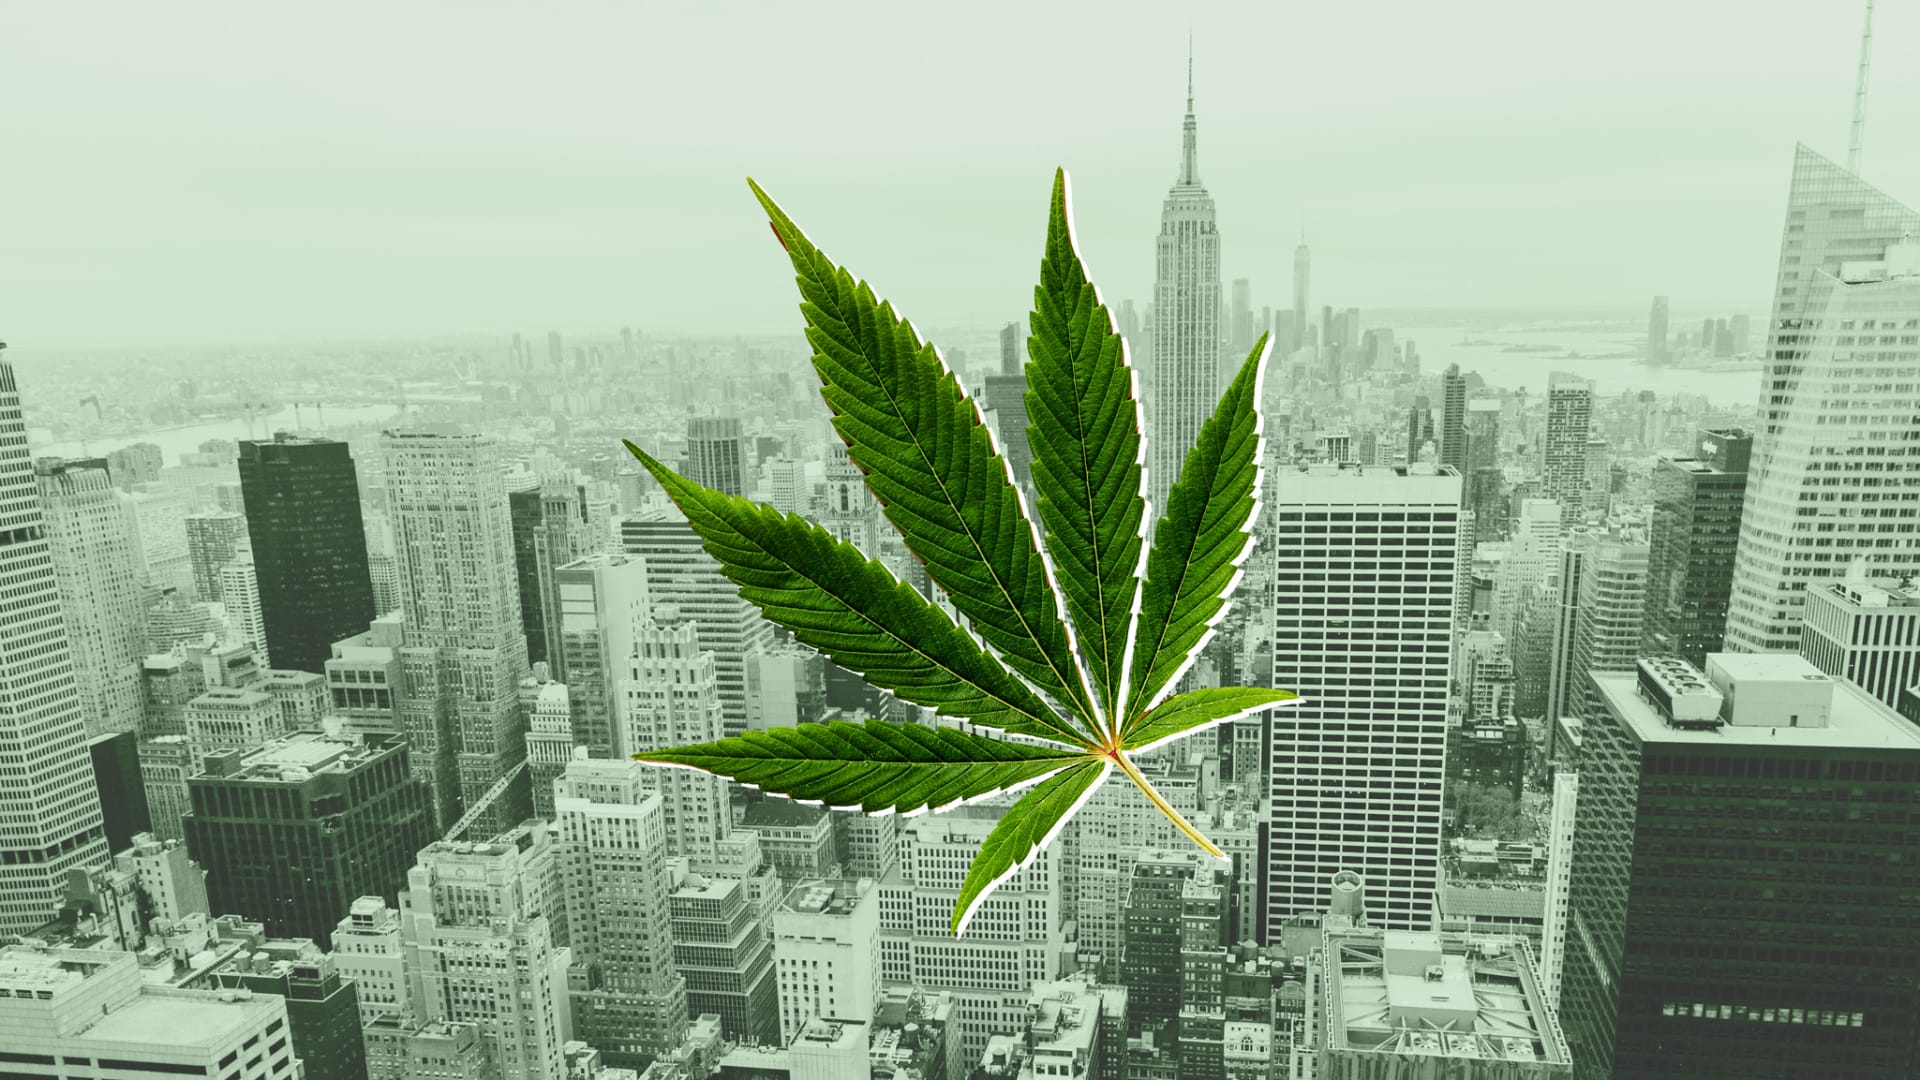 New York Dedicates $200 Million to Help Launch Social Equity Weed Businesses